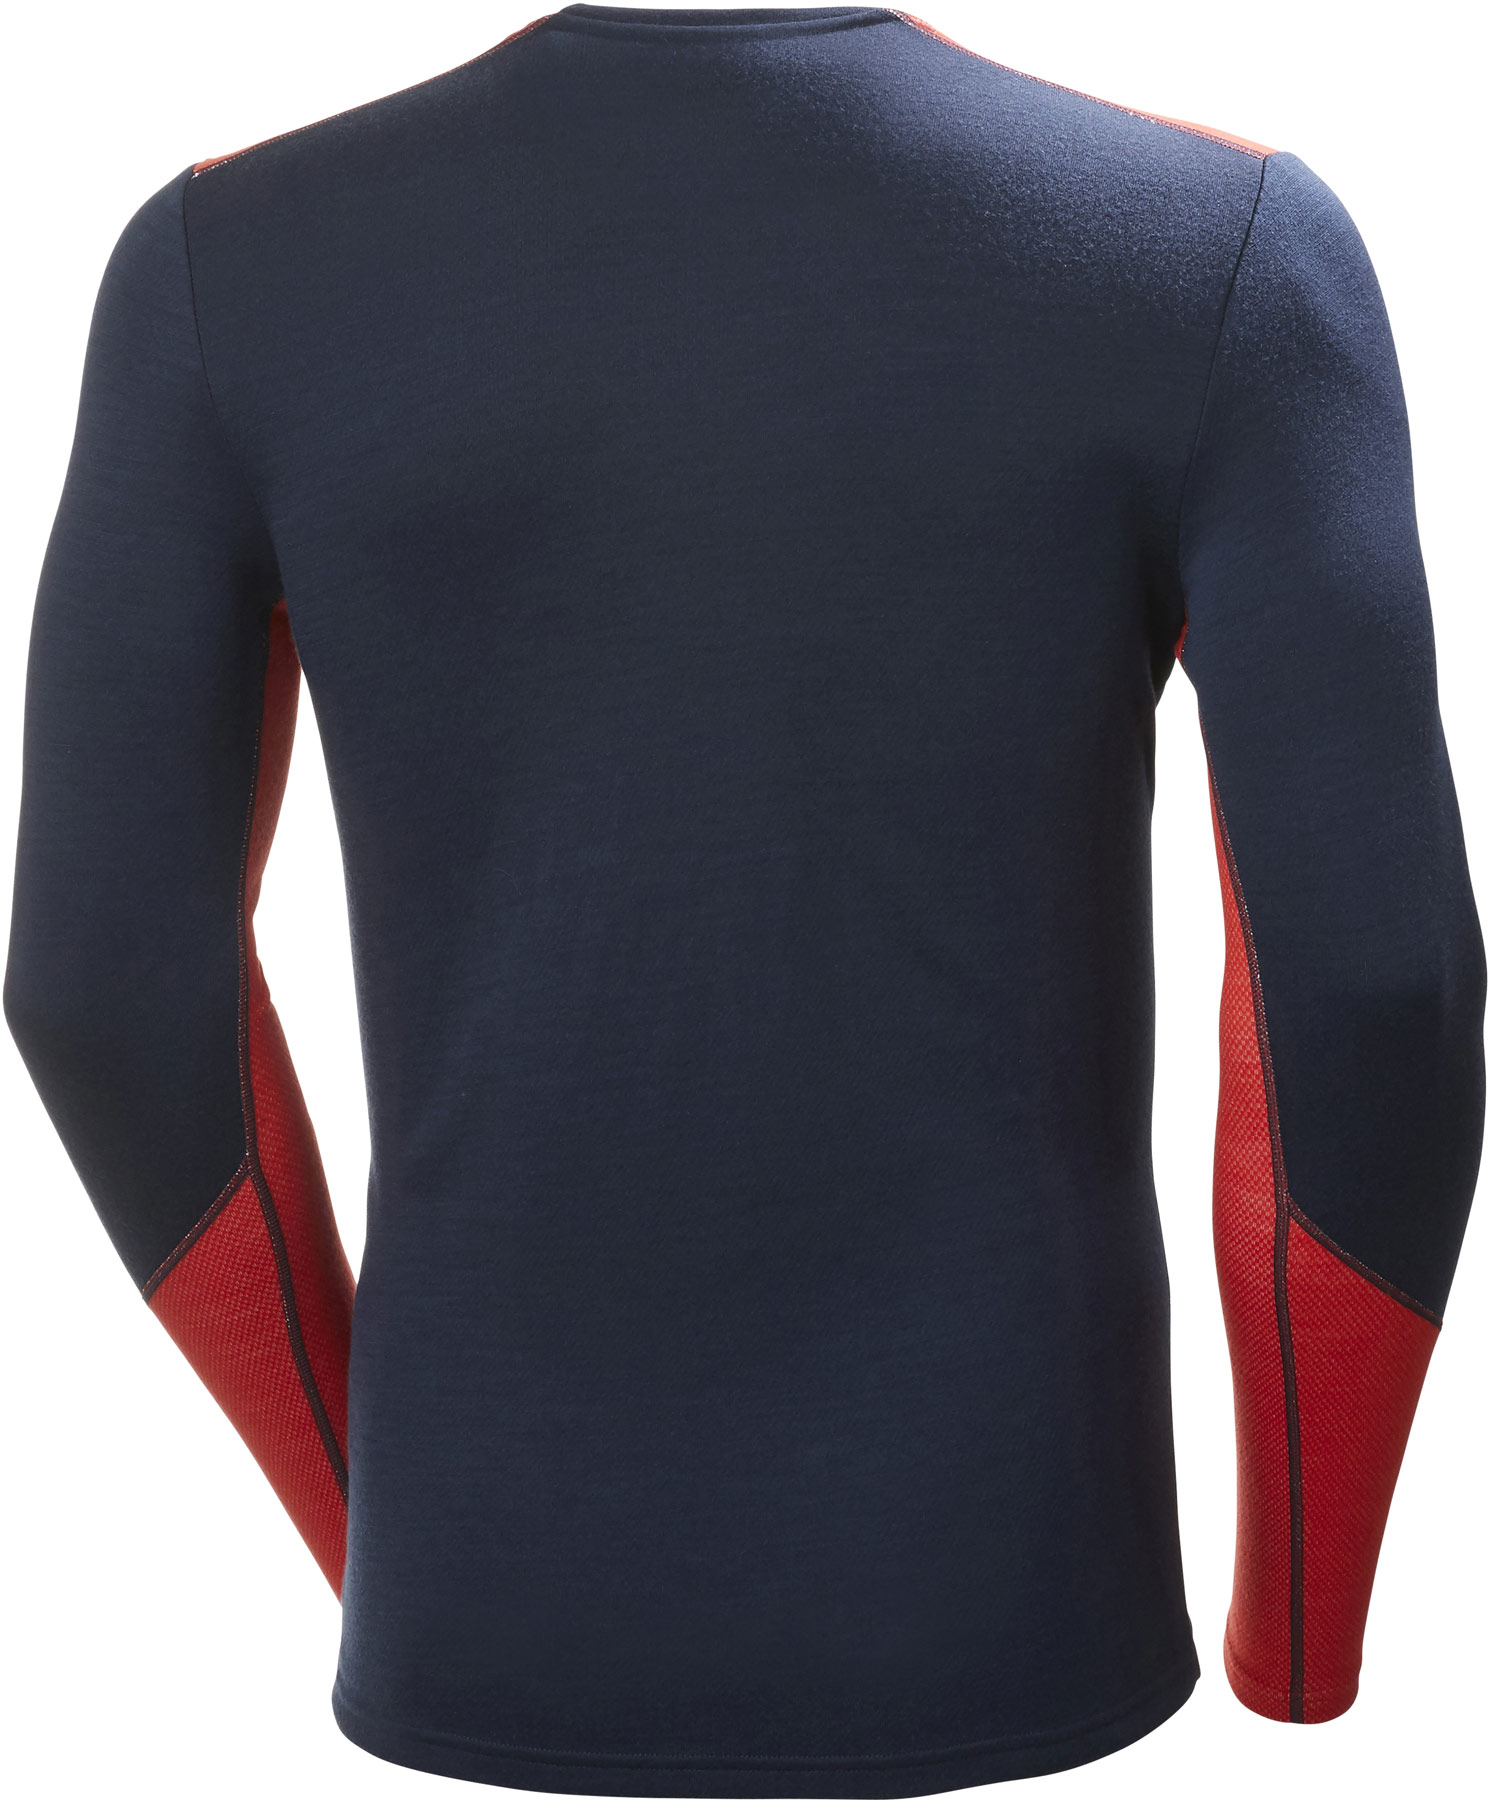 Men's highly functional base layer